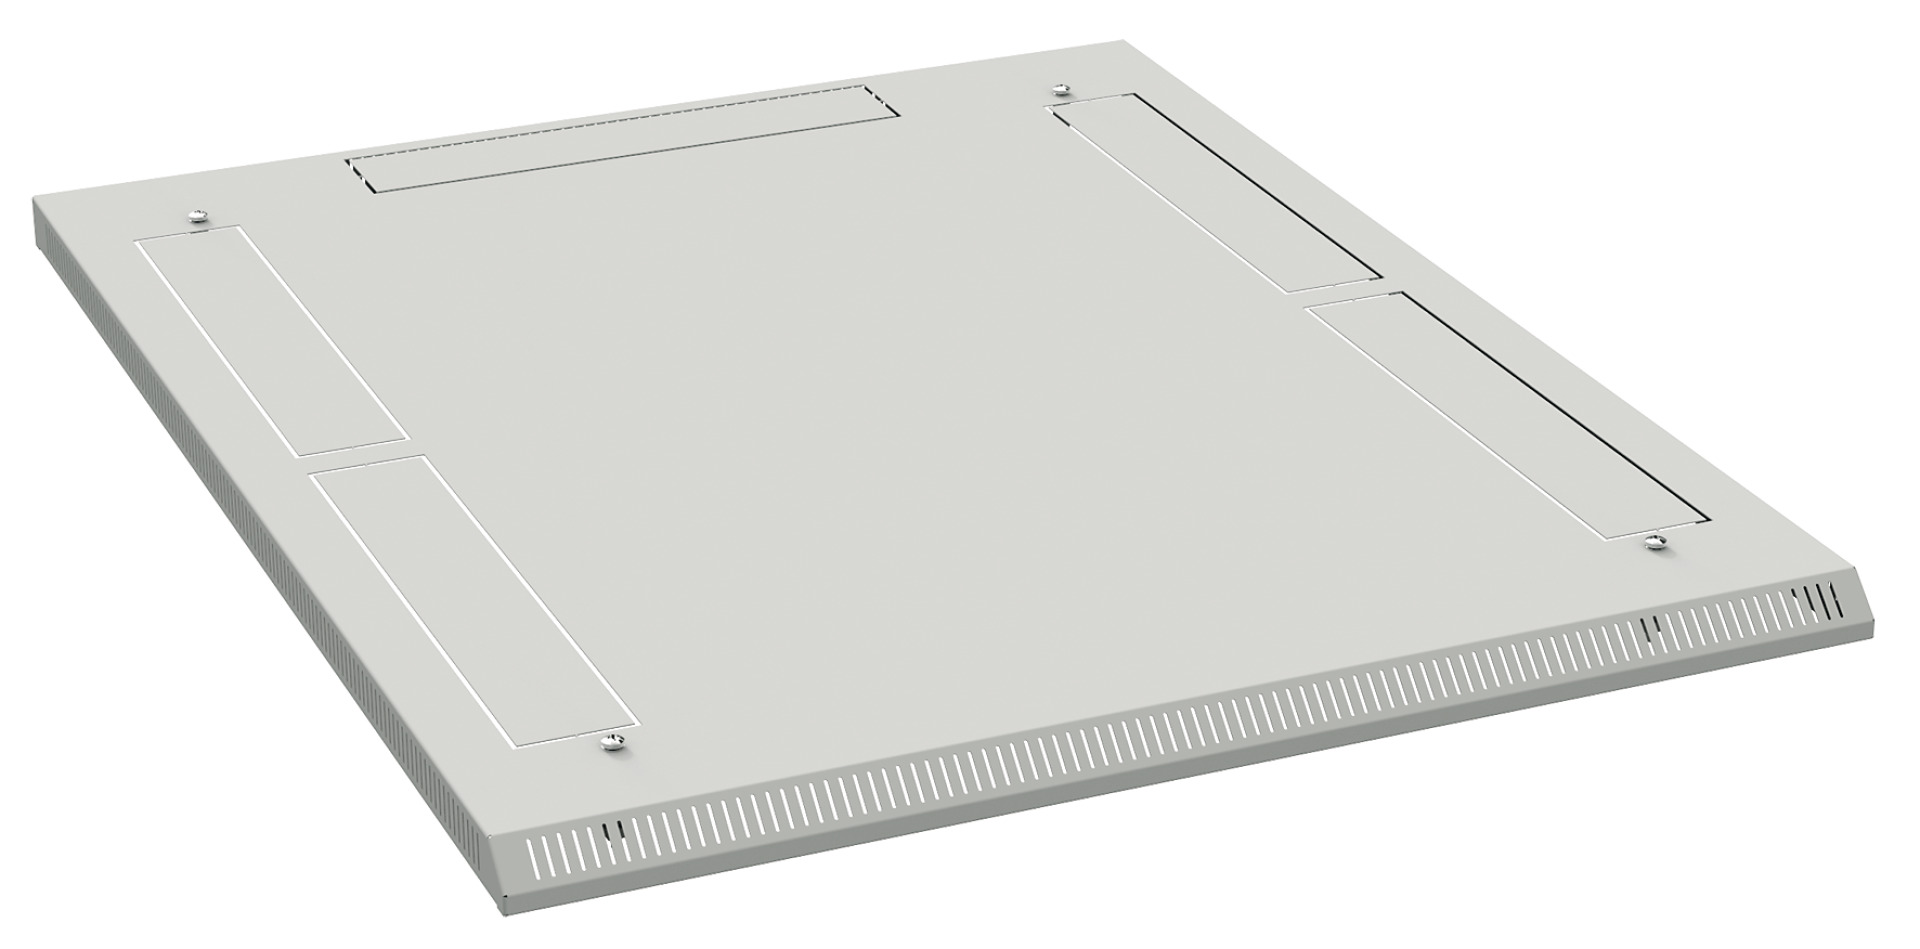 Additional Roof H=40 mm, 600x1200 mm, RAL7035, for Cabinet Series PRO